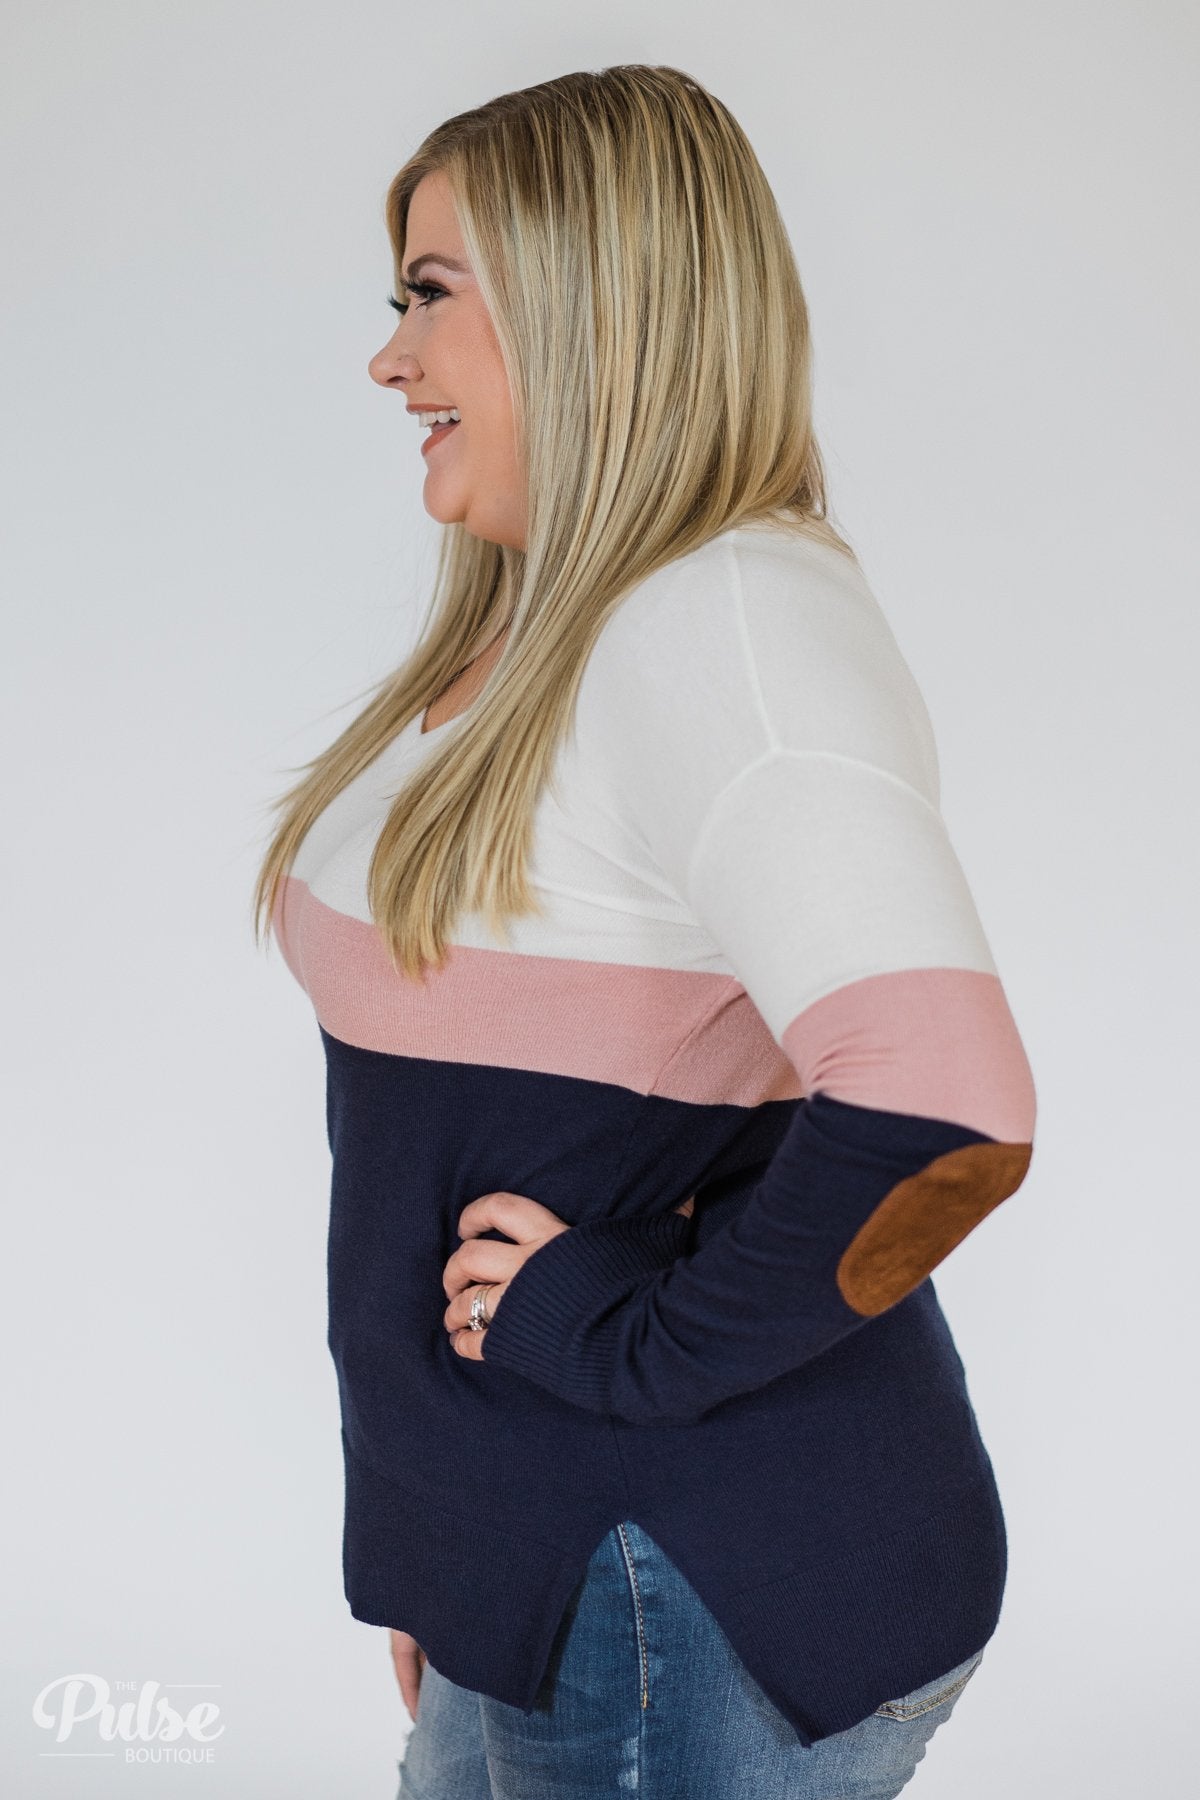 Adore You Color Block Sweater- Navy & Pink